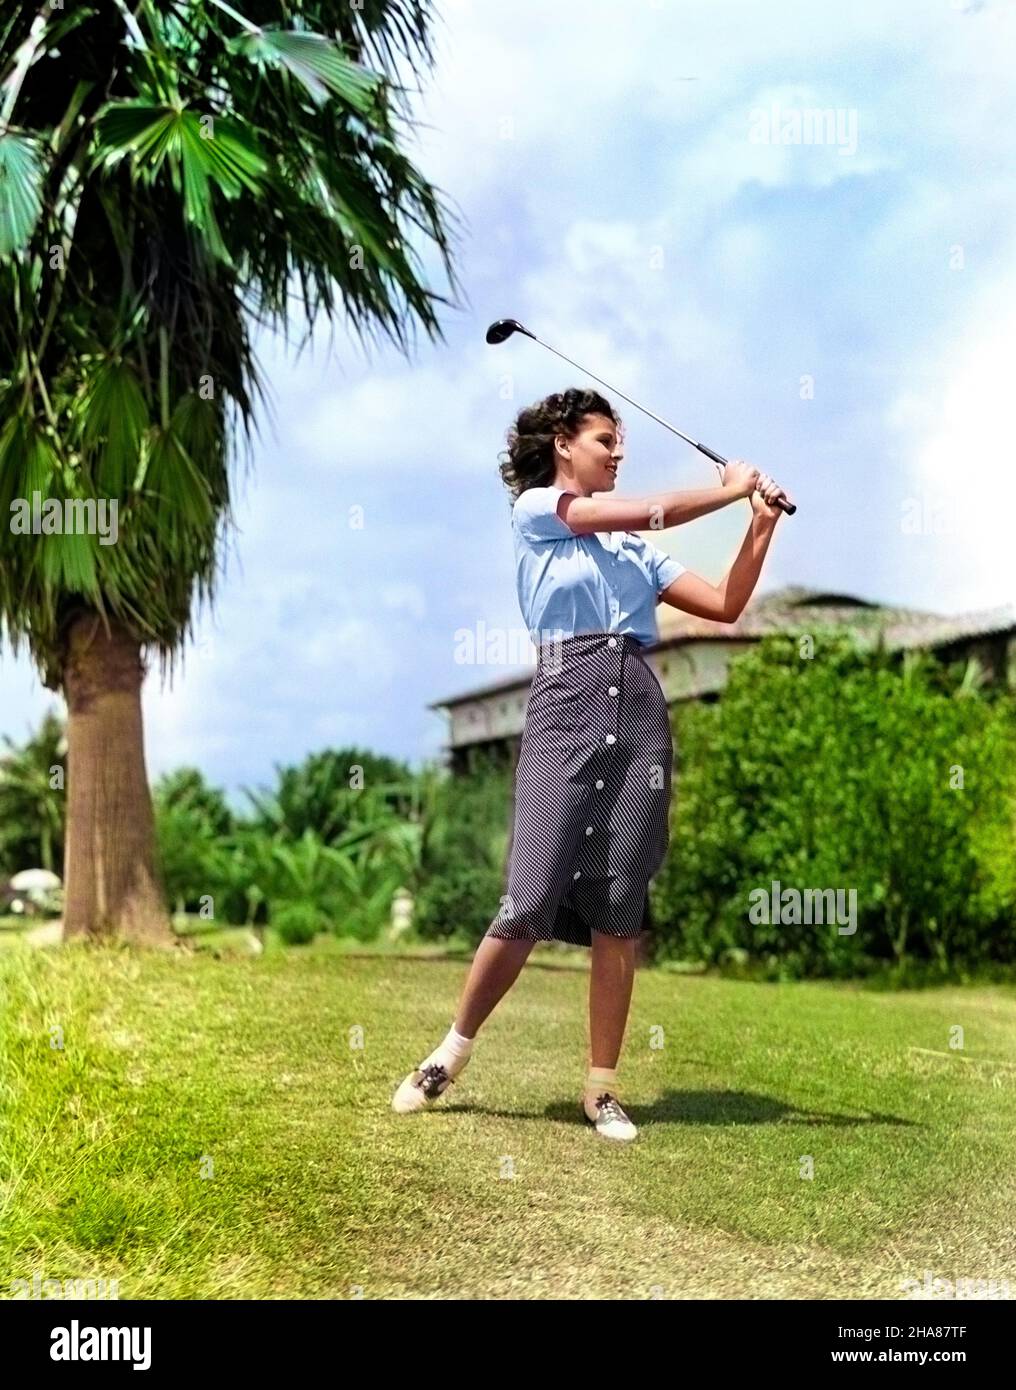 Vintage Golfer High Resolution Stock Photography and Images - Alamy